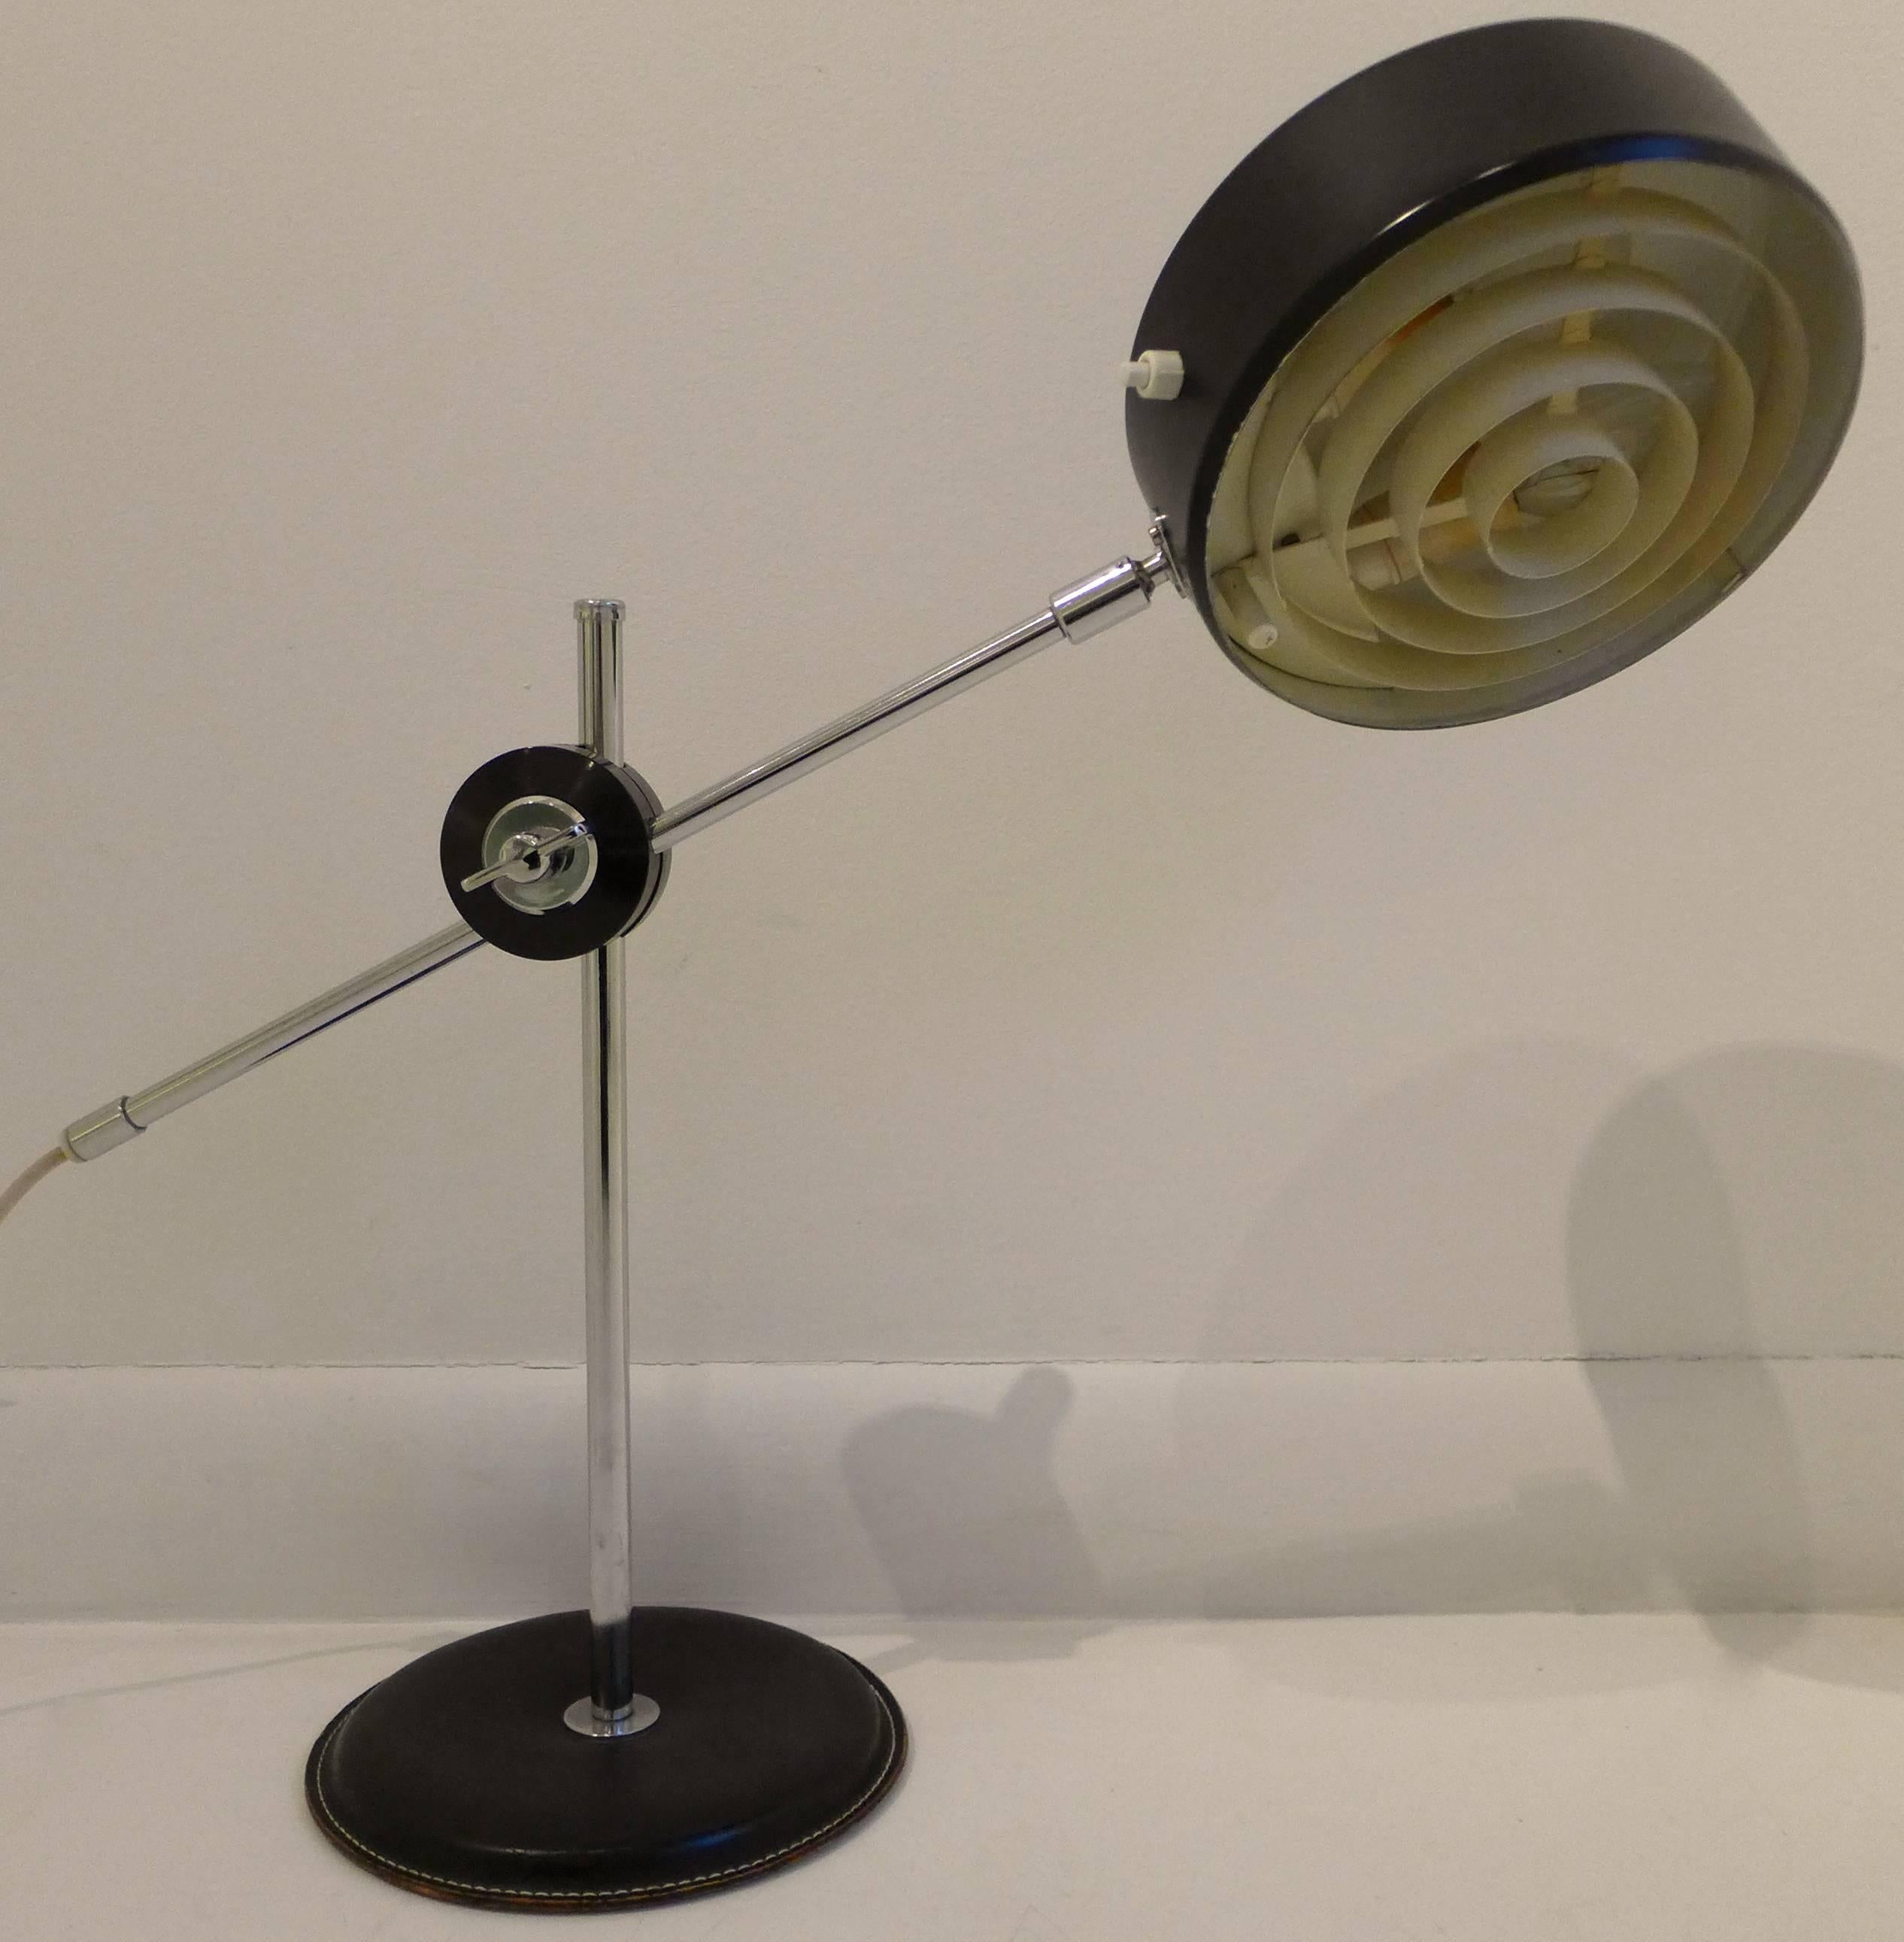 Adjustable desk lamp of polished chrome and enameled aluminum, with a leather clad base. Designed by Anders Pehrson for Ateljé Lyktan, produced circa 1960s. In fine original condition.